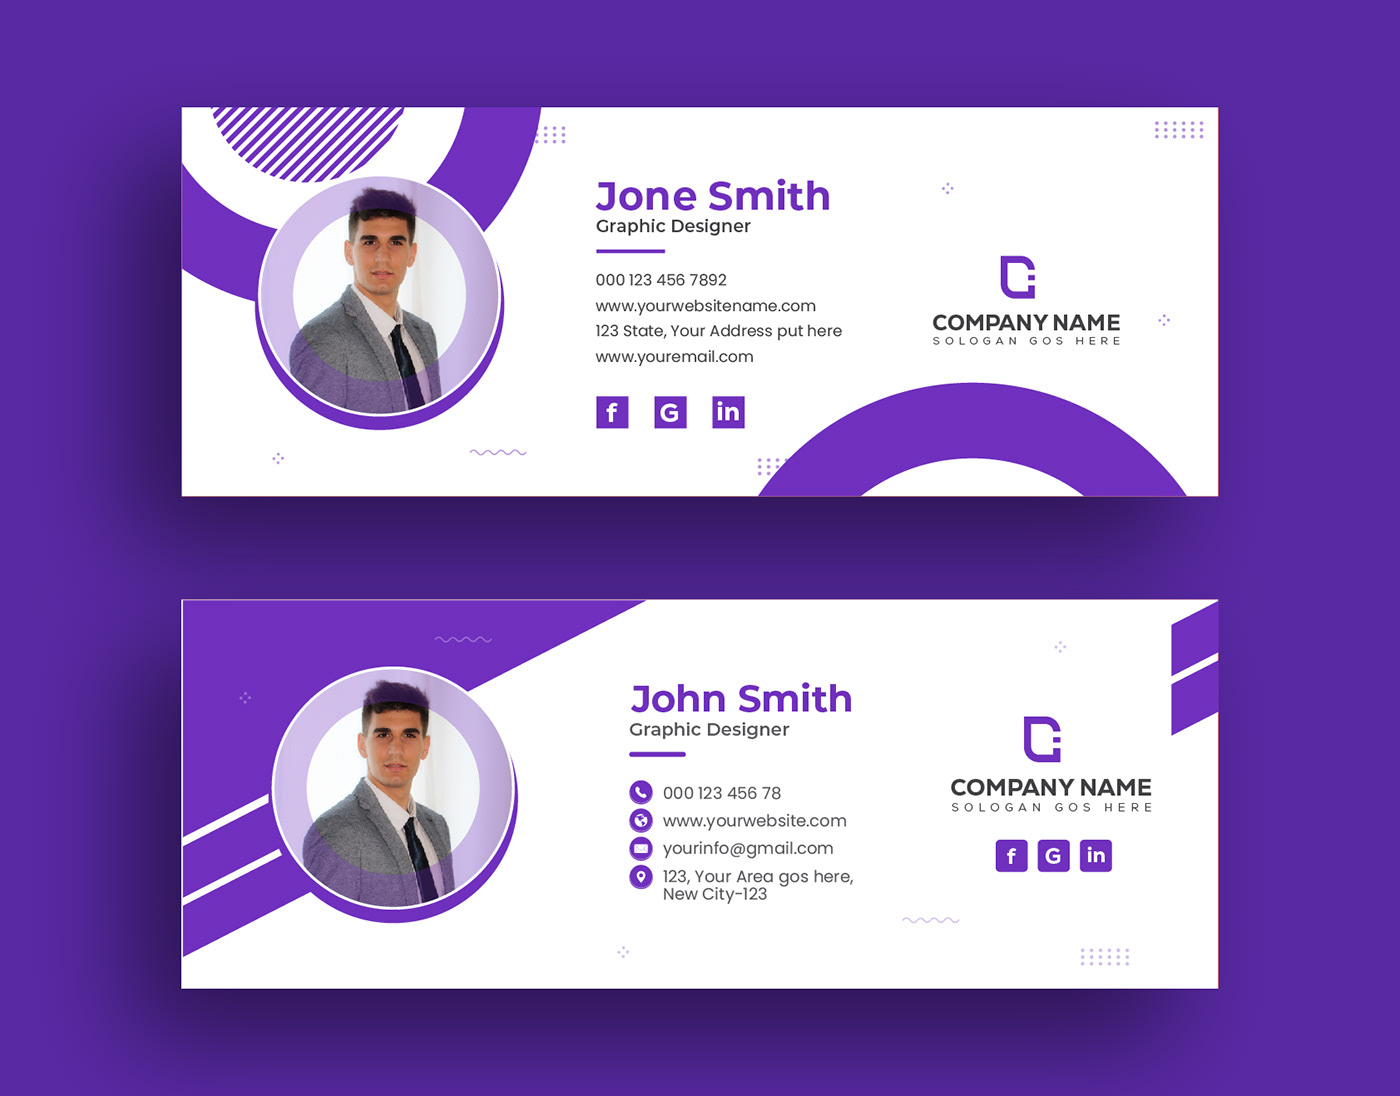 corporate email signature Email Email Design Email Footer email signature email signature design email spam minimal email signature social media cover template